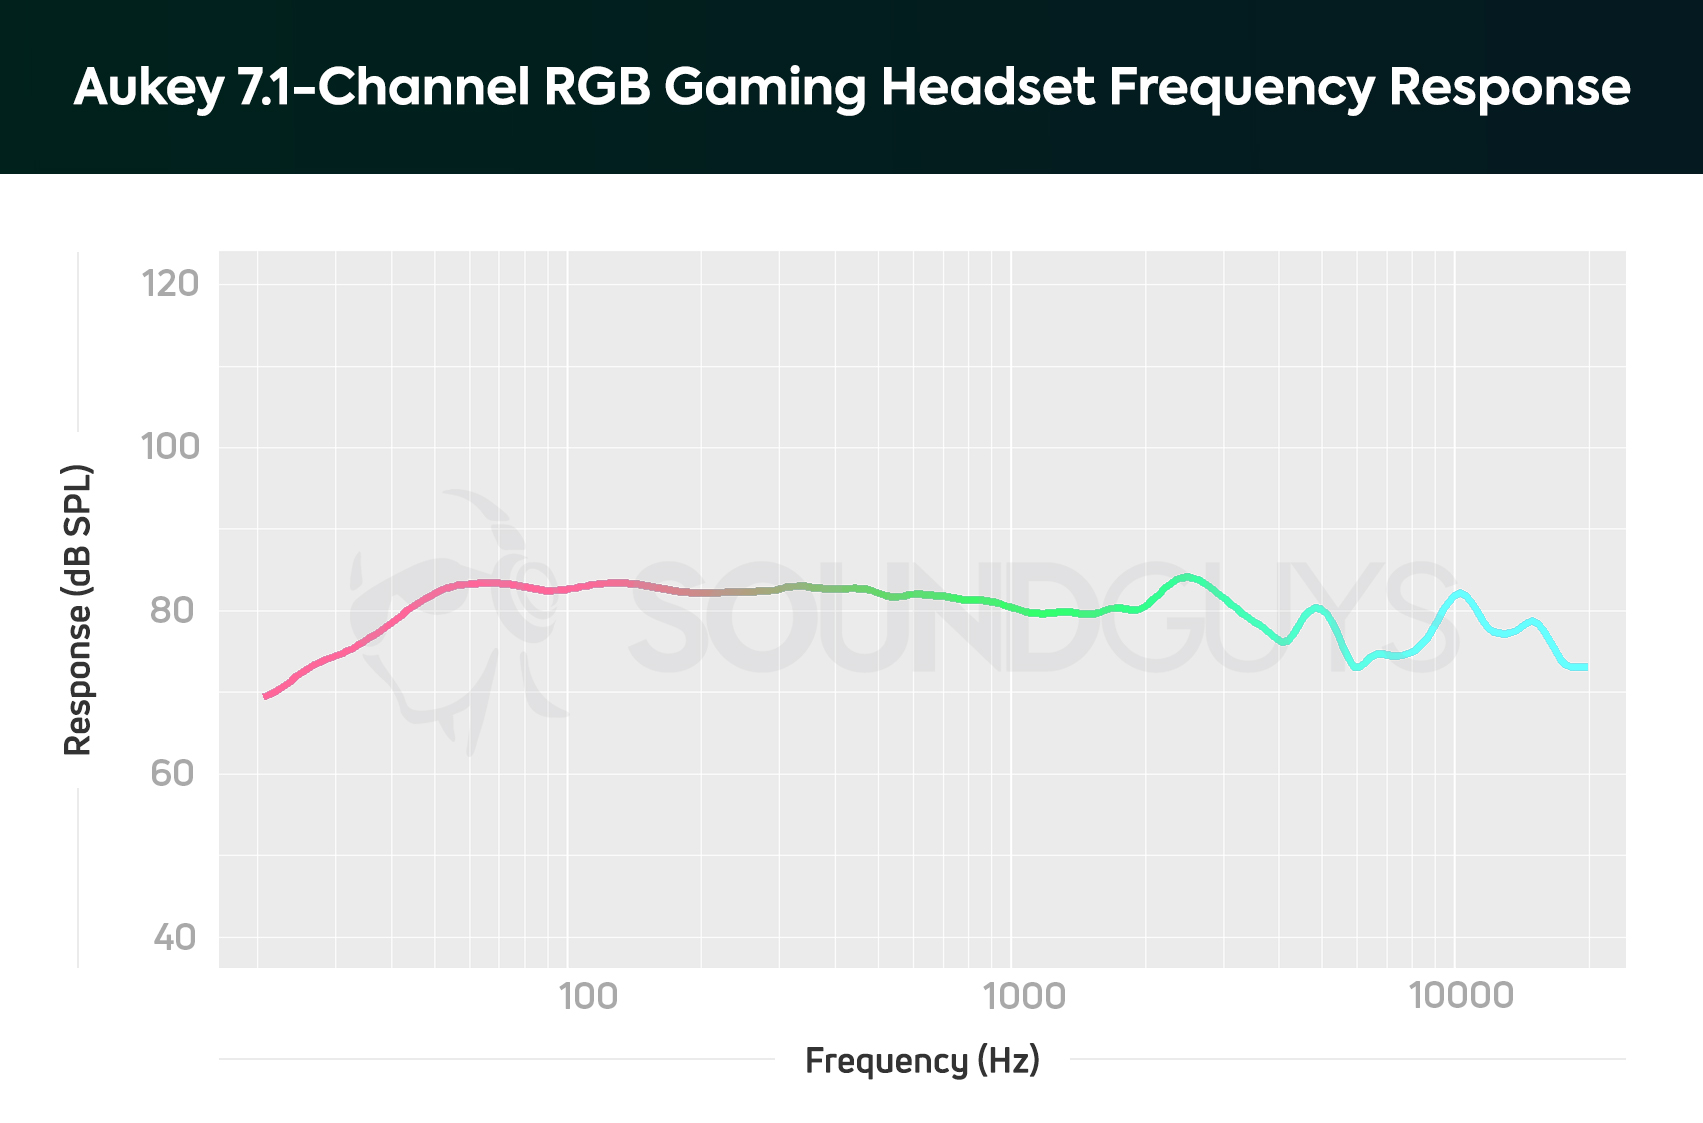 The frequency response of the Aukey 7.1 Gaming Headset.